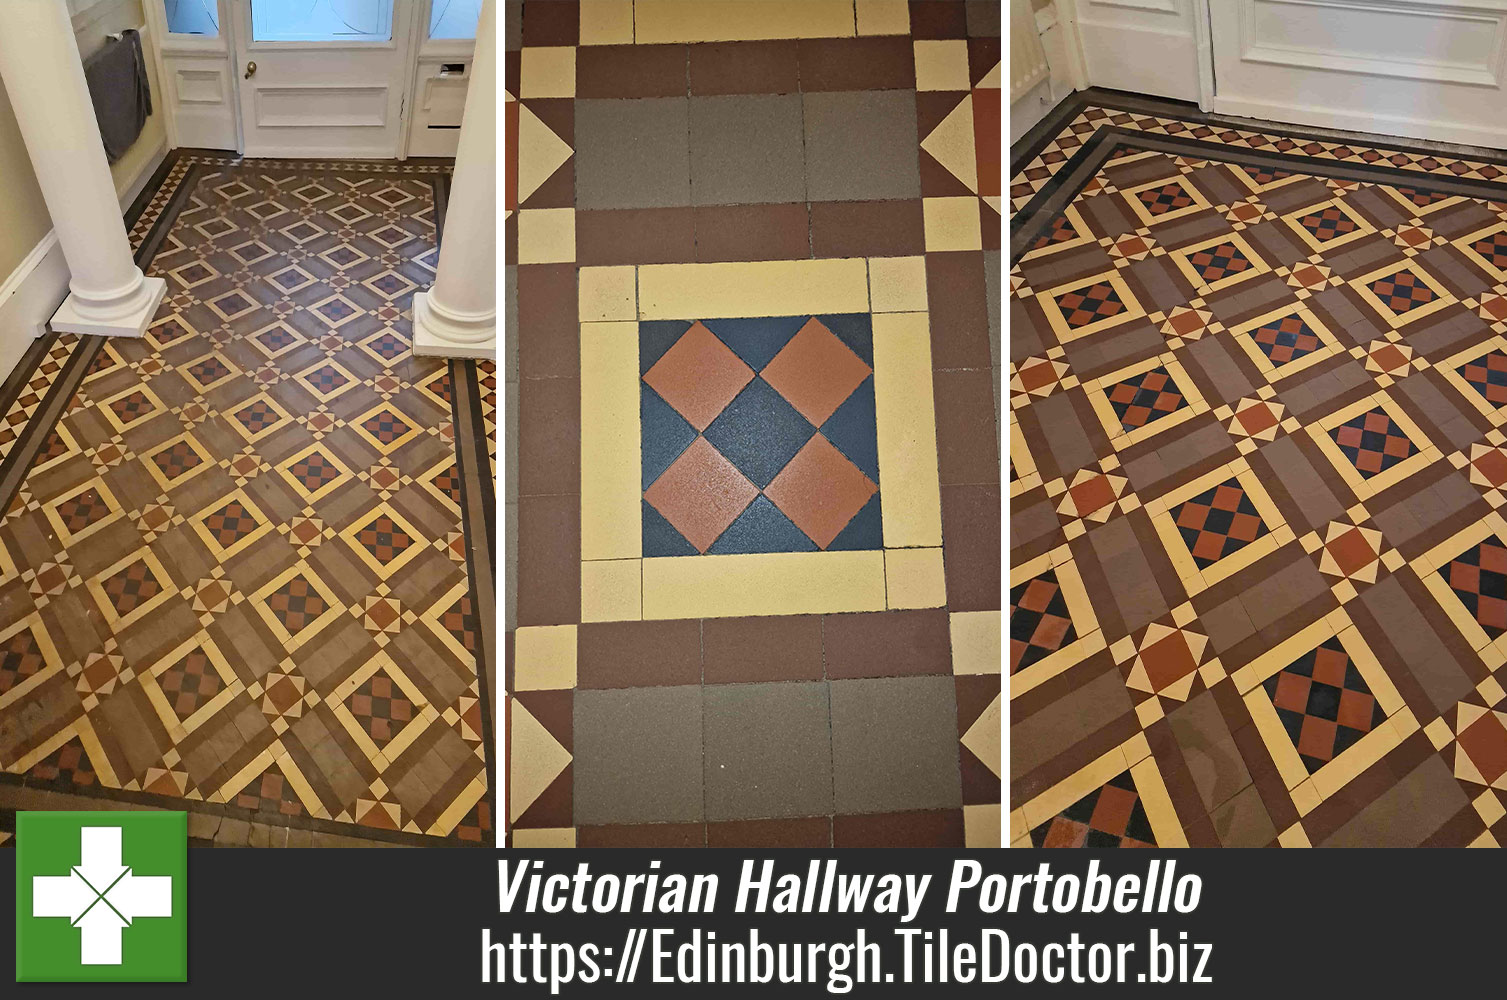 Using Tile Doctor Grout Clean-up to Deep Clean Victorian Hallway Tiles in Portobello Edinburgh